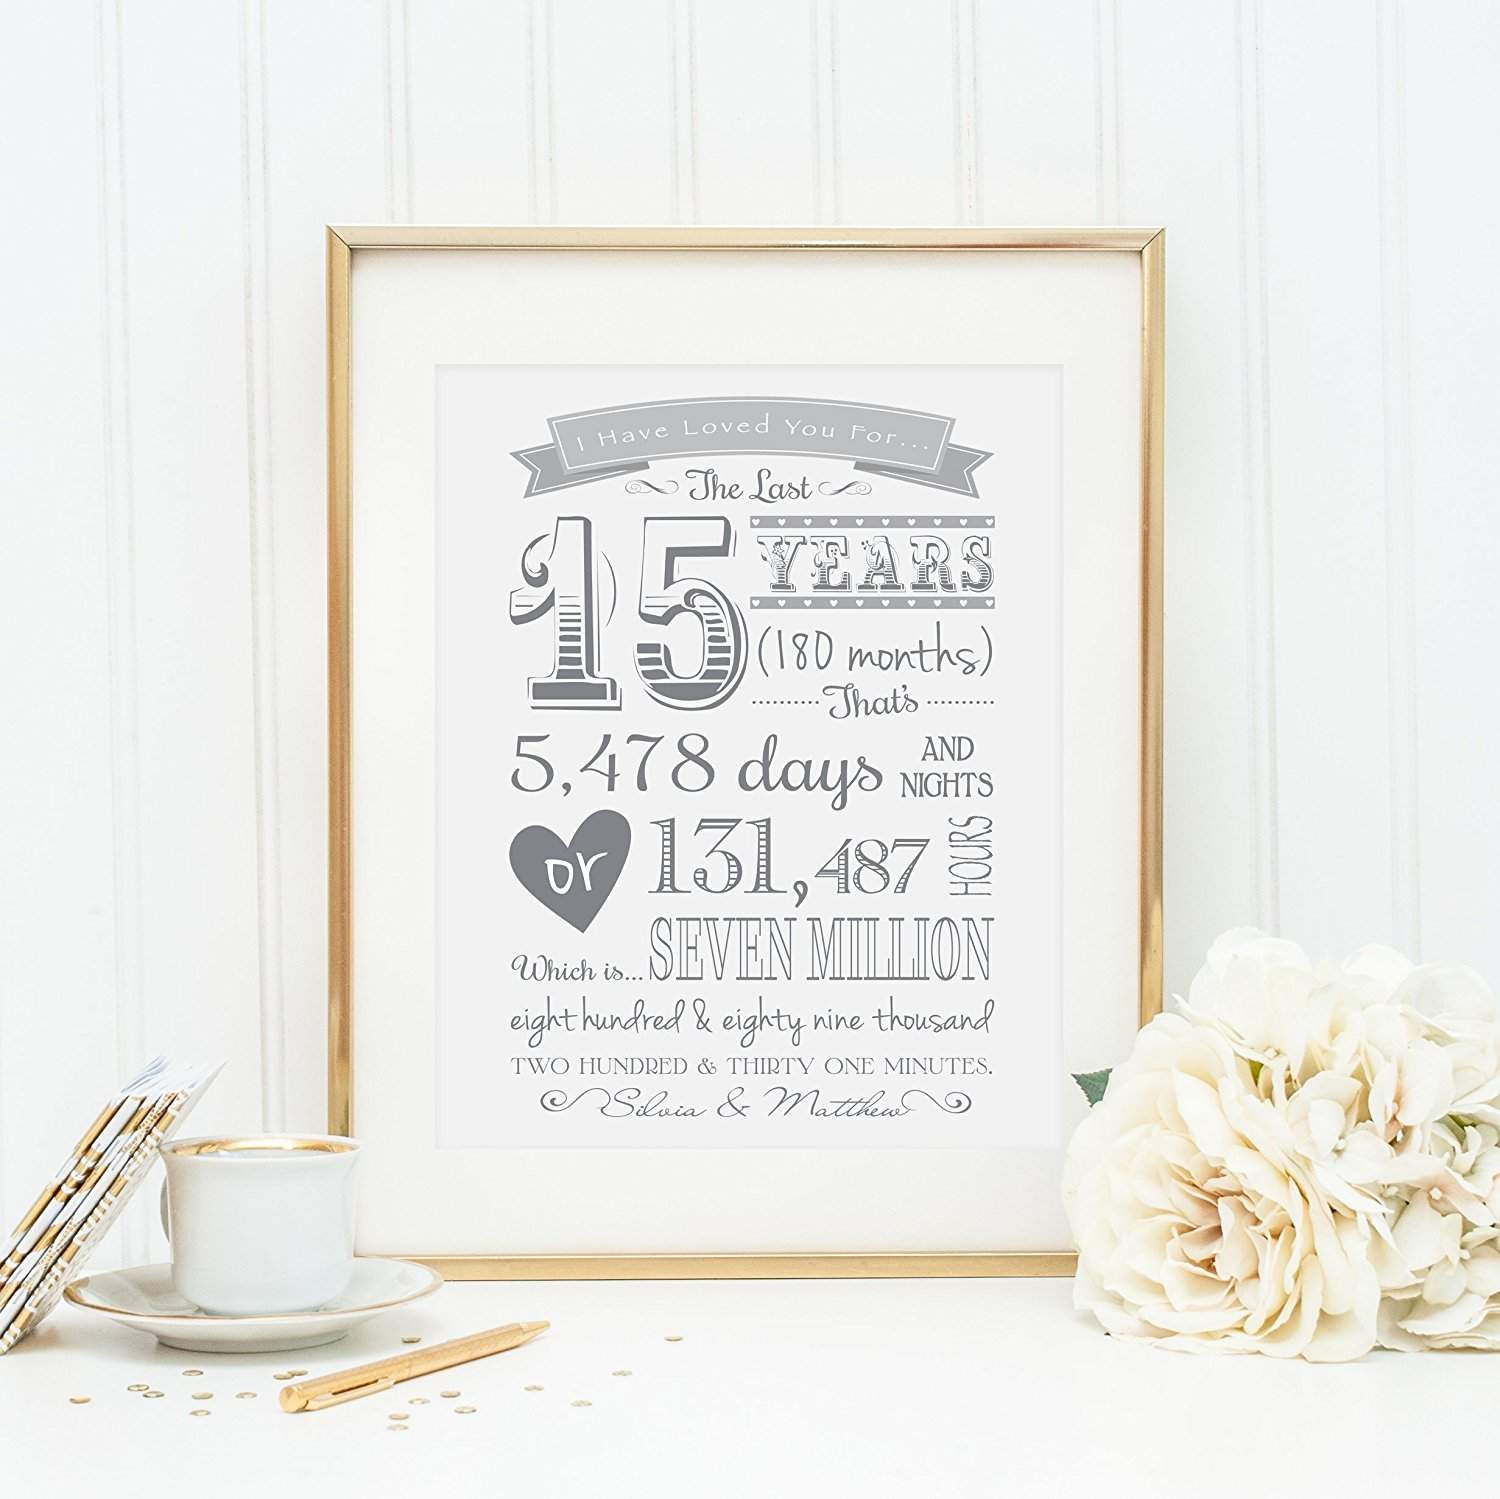 Gift Ideas For Bride On Wedding Day
 Best Wedding Day Gift Ideas From the Groom to the Bride